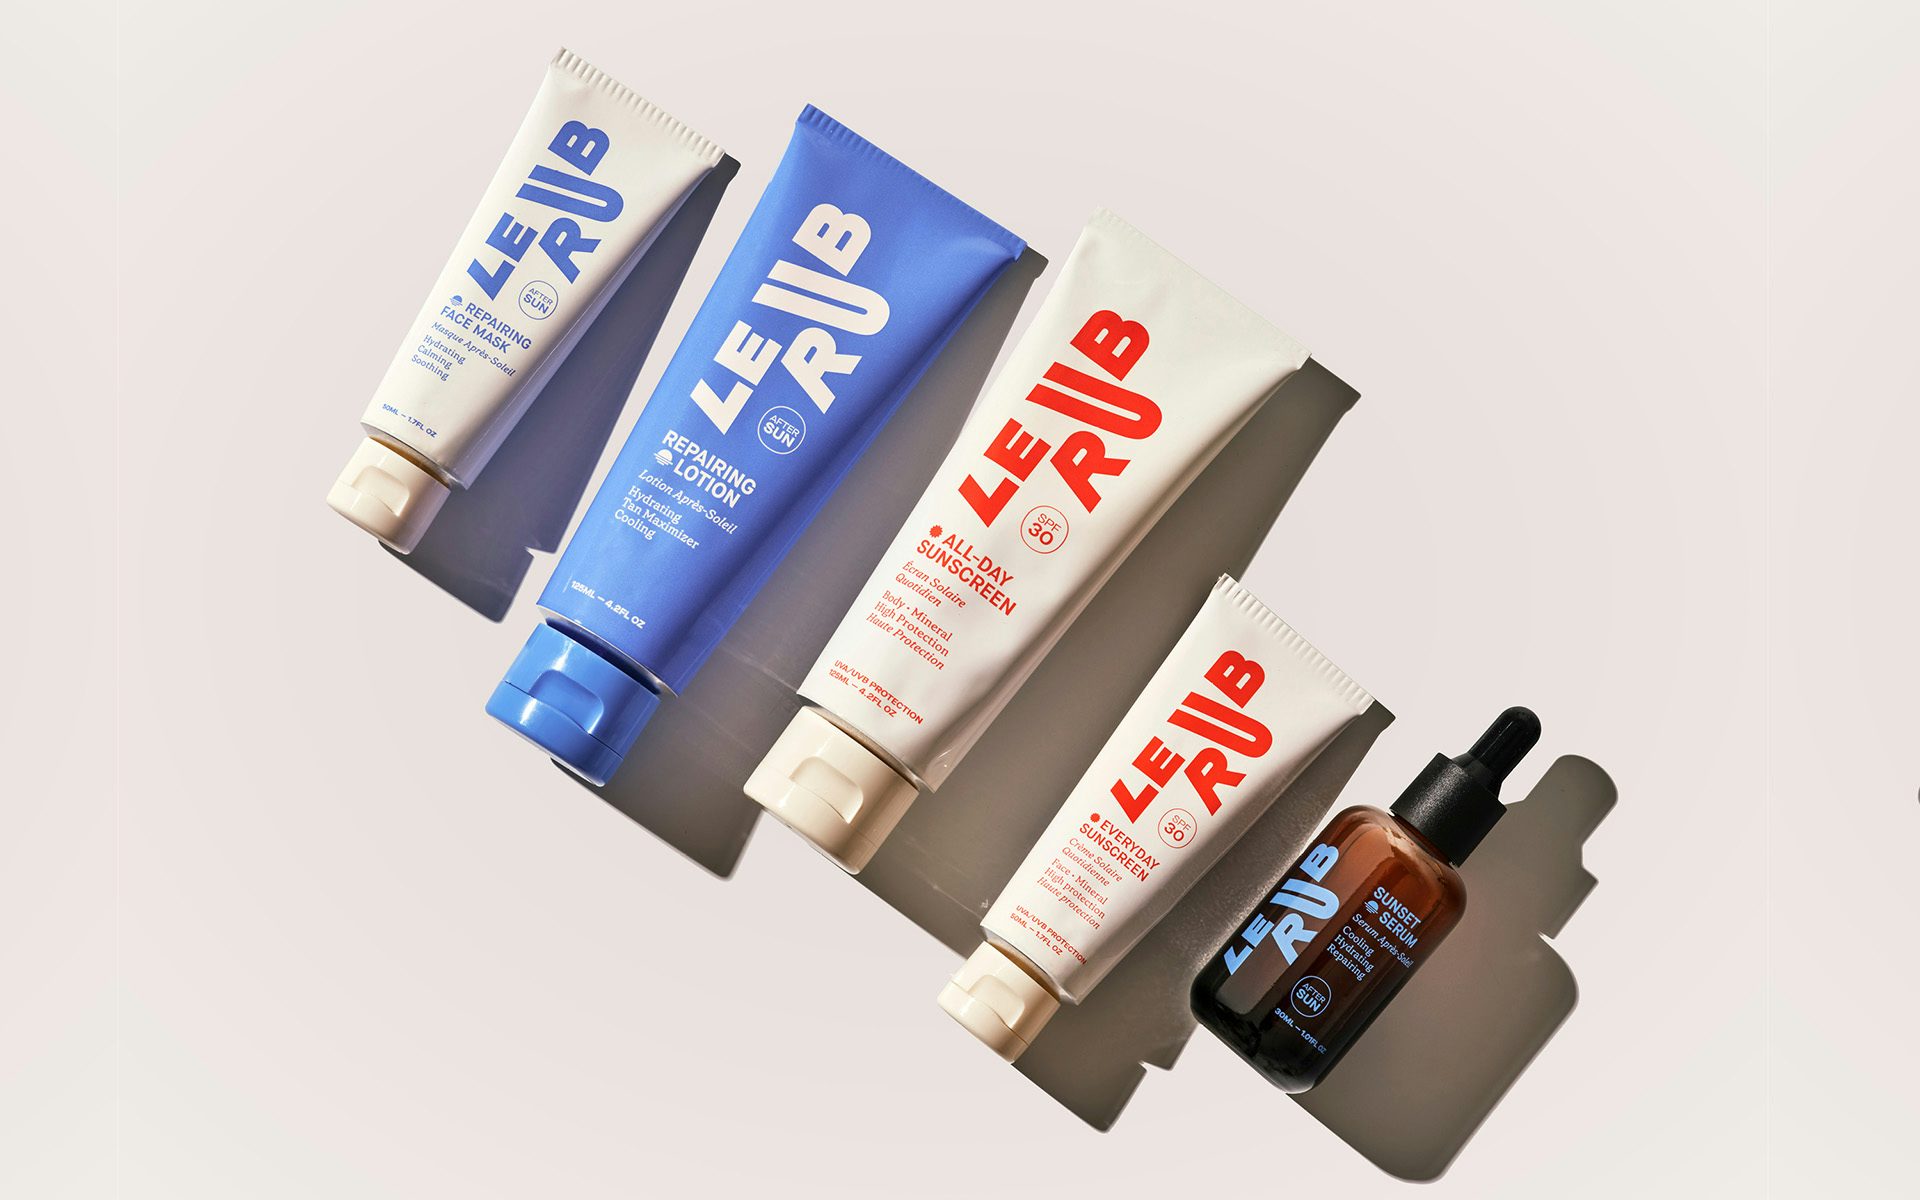 Photo of Le Rub sunscreen products